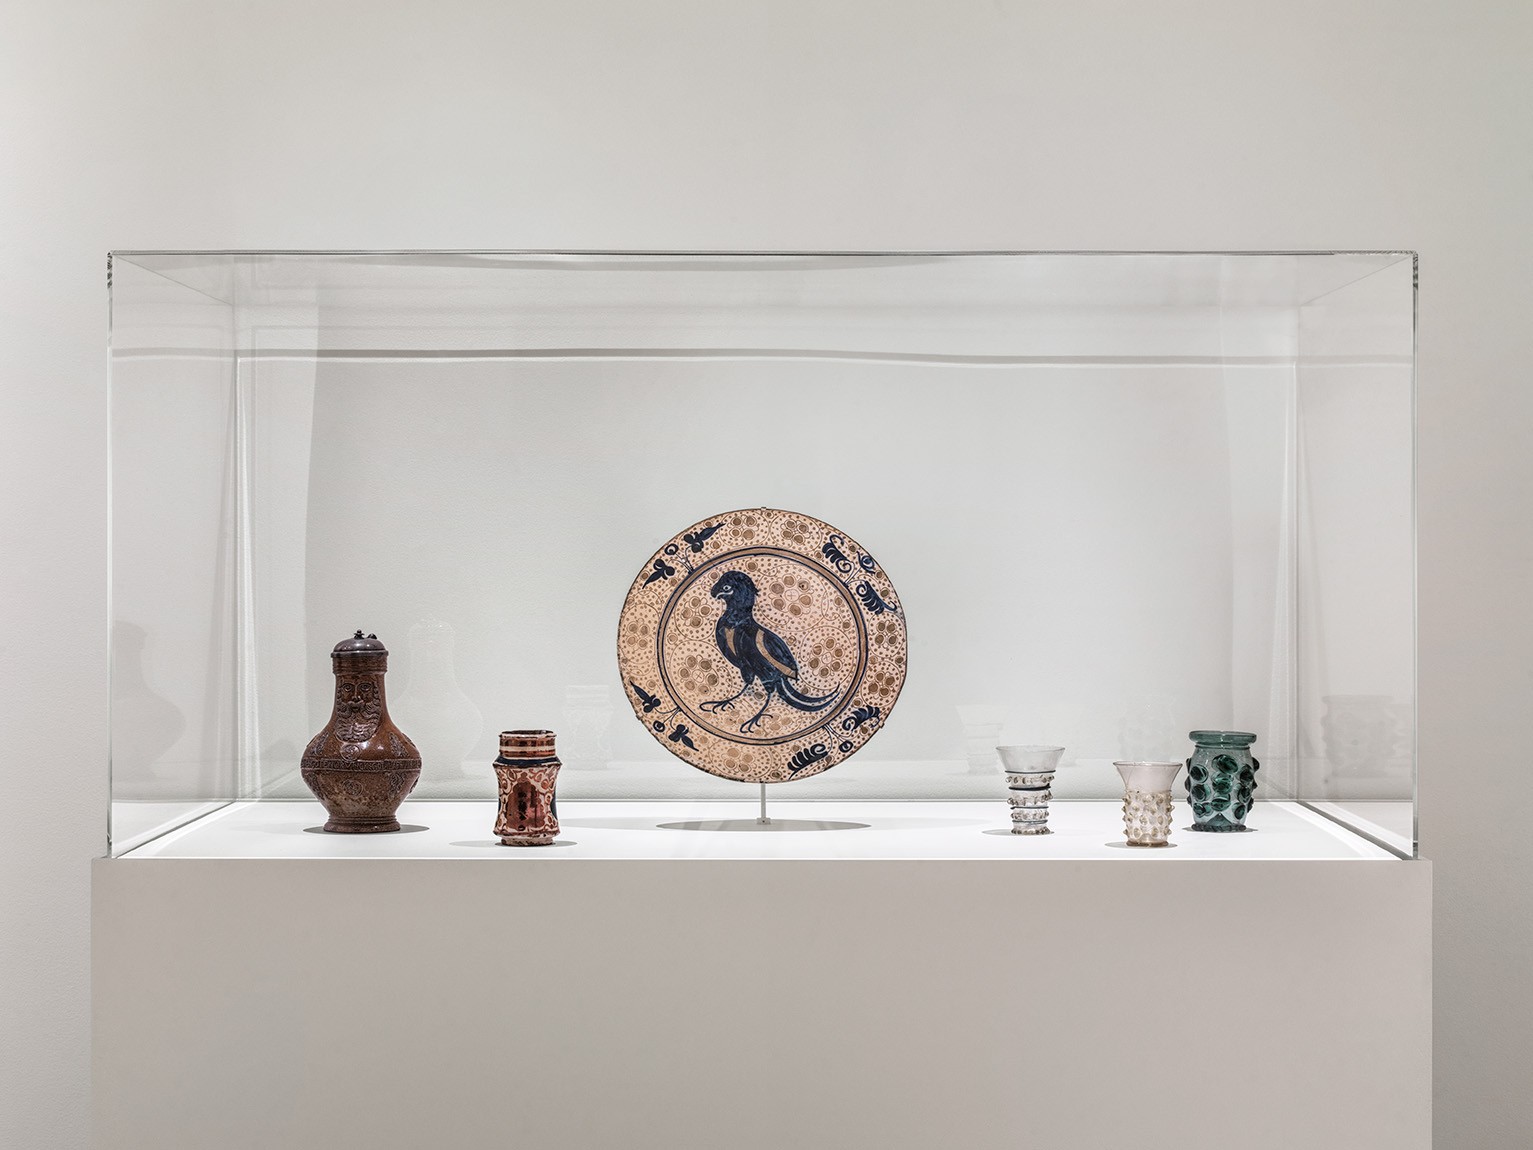 Glass dishes, cups, and bartmann from the middle ages on display at the Pulitzer Arts Foundation